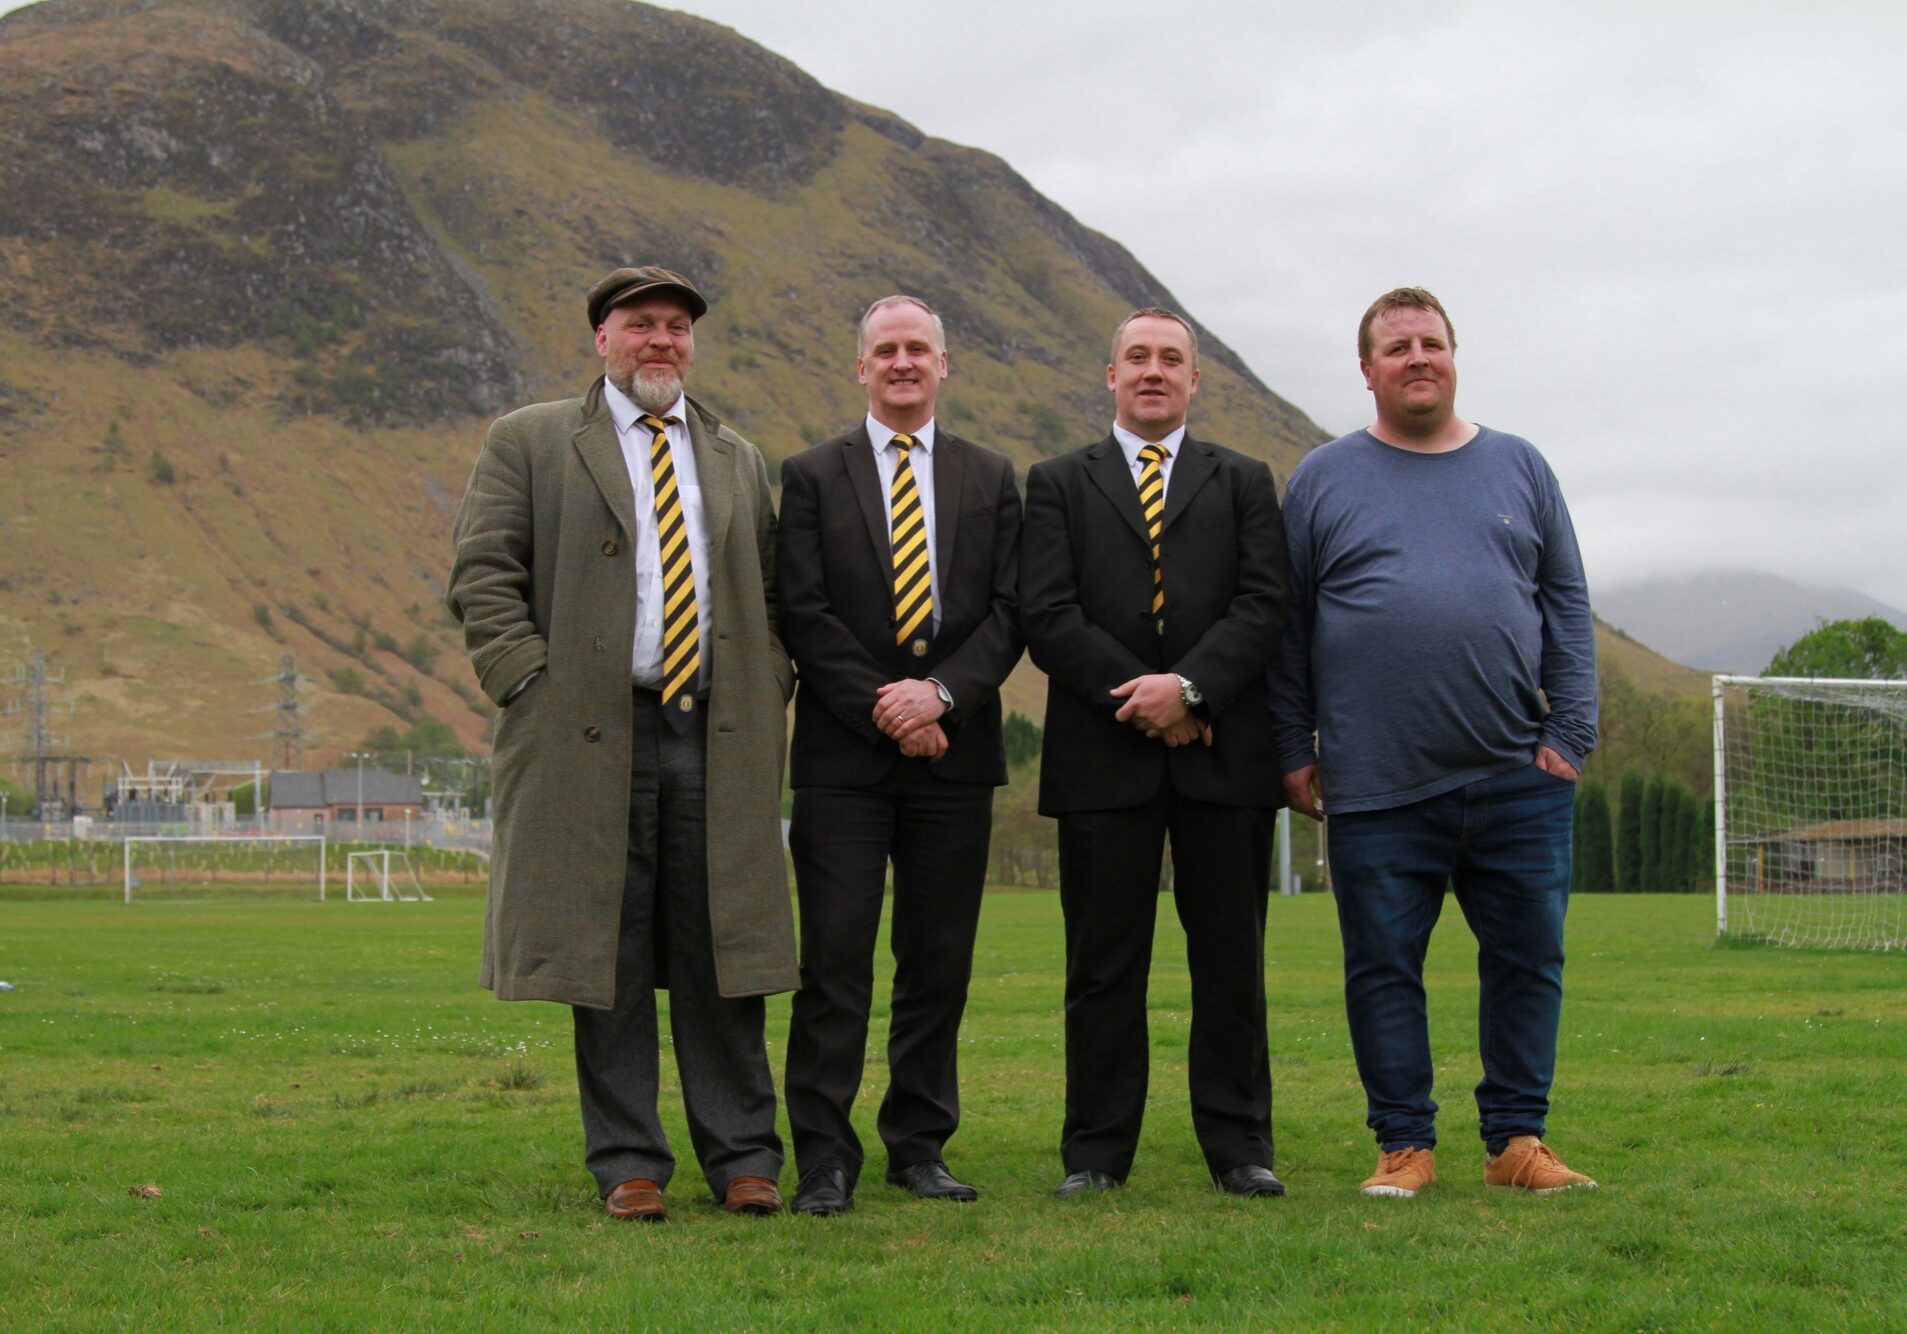 The Fort William Football Club board (from left) Colin Wood, Peter Murphy, Russell MacMorran and Willie Edward  (Photo: IMG/BBC)